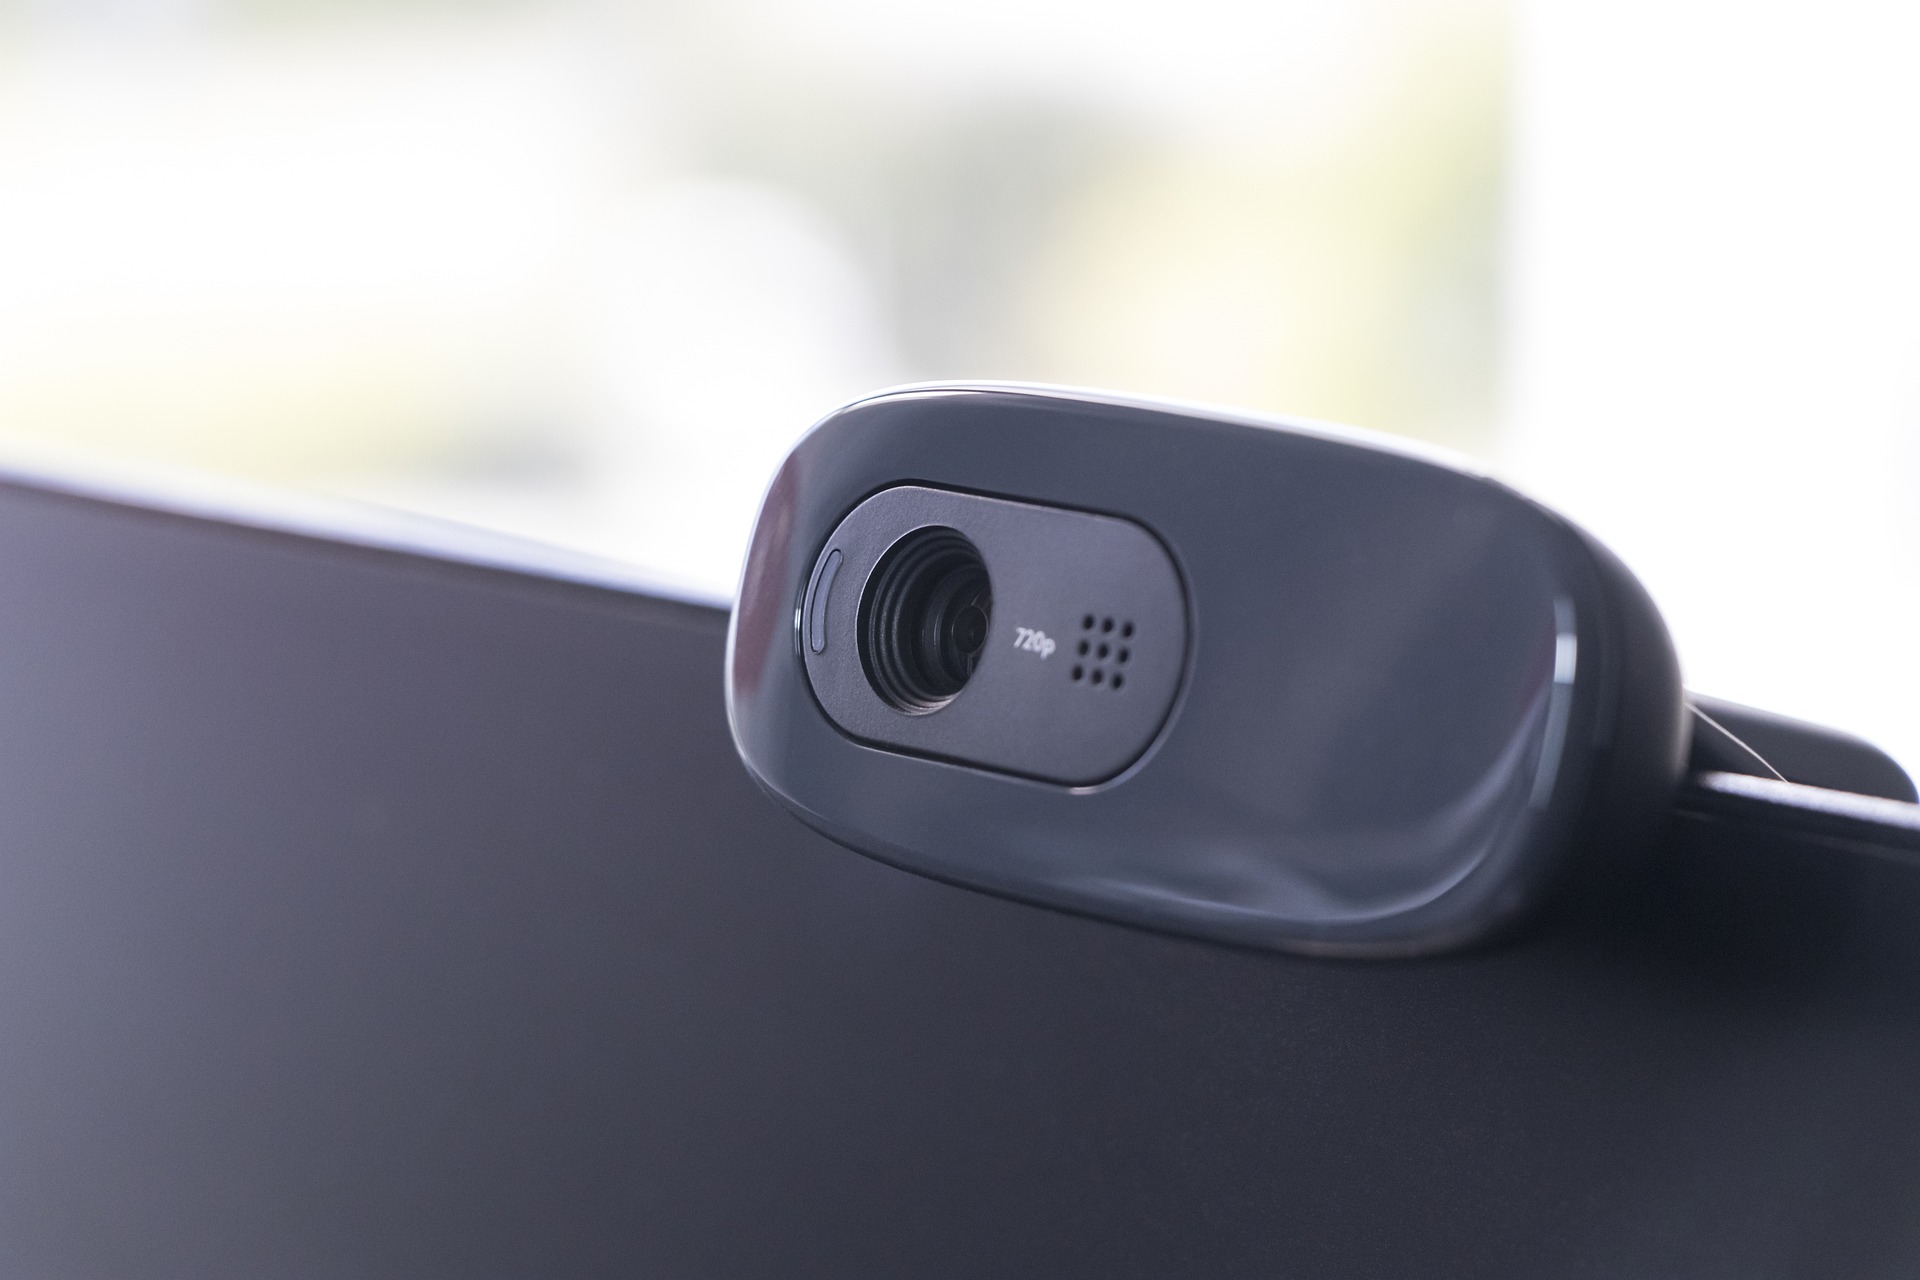 Here’s Why You Should Buy A Webcam With Safety Features